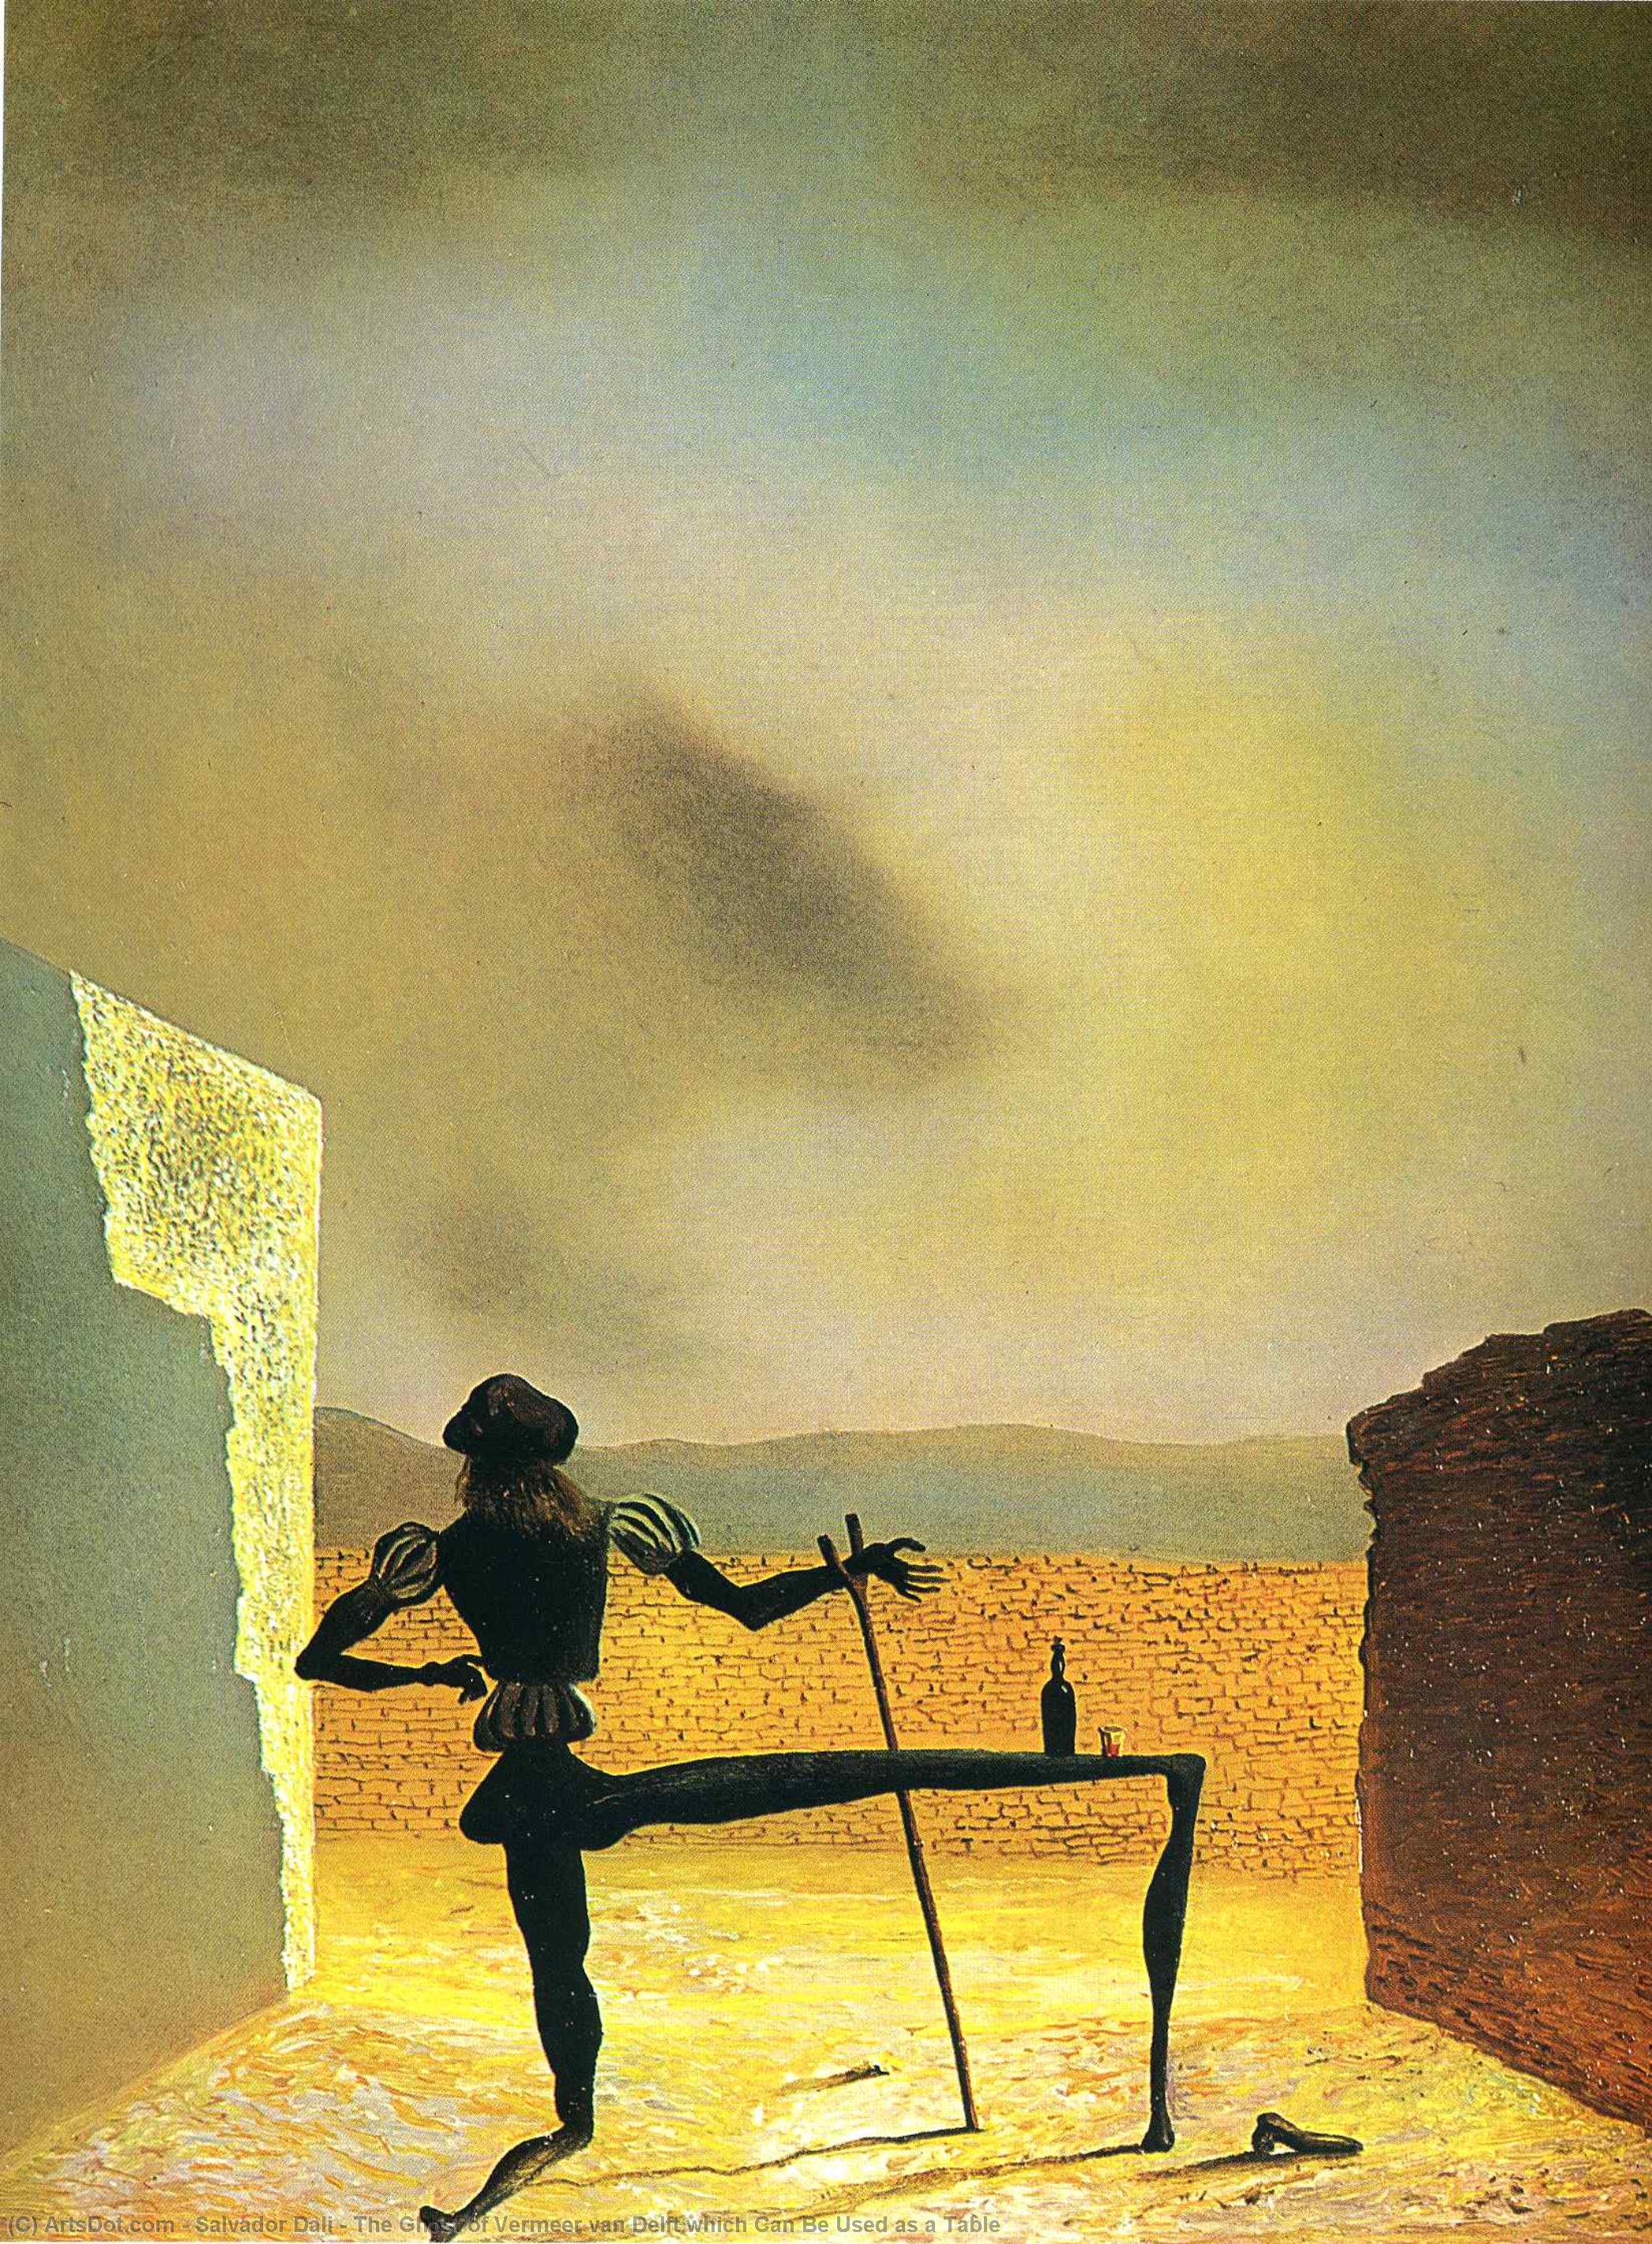 WikiOO.org - Encyclopedia of Fine Arts - Maalaus, taideteos Salvador Dali - The Ghost of Vermeer van Delft which Can Be Used as a Table